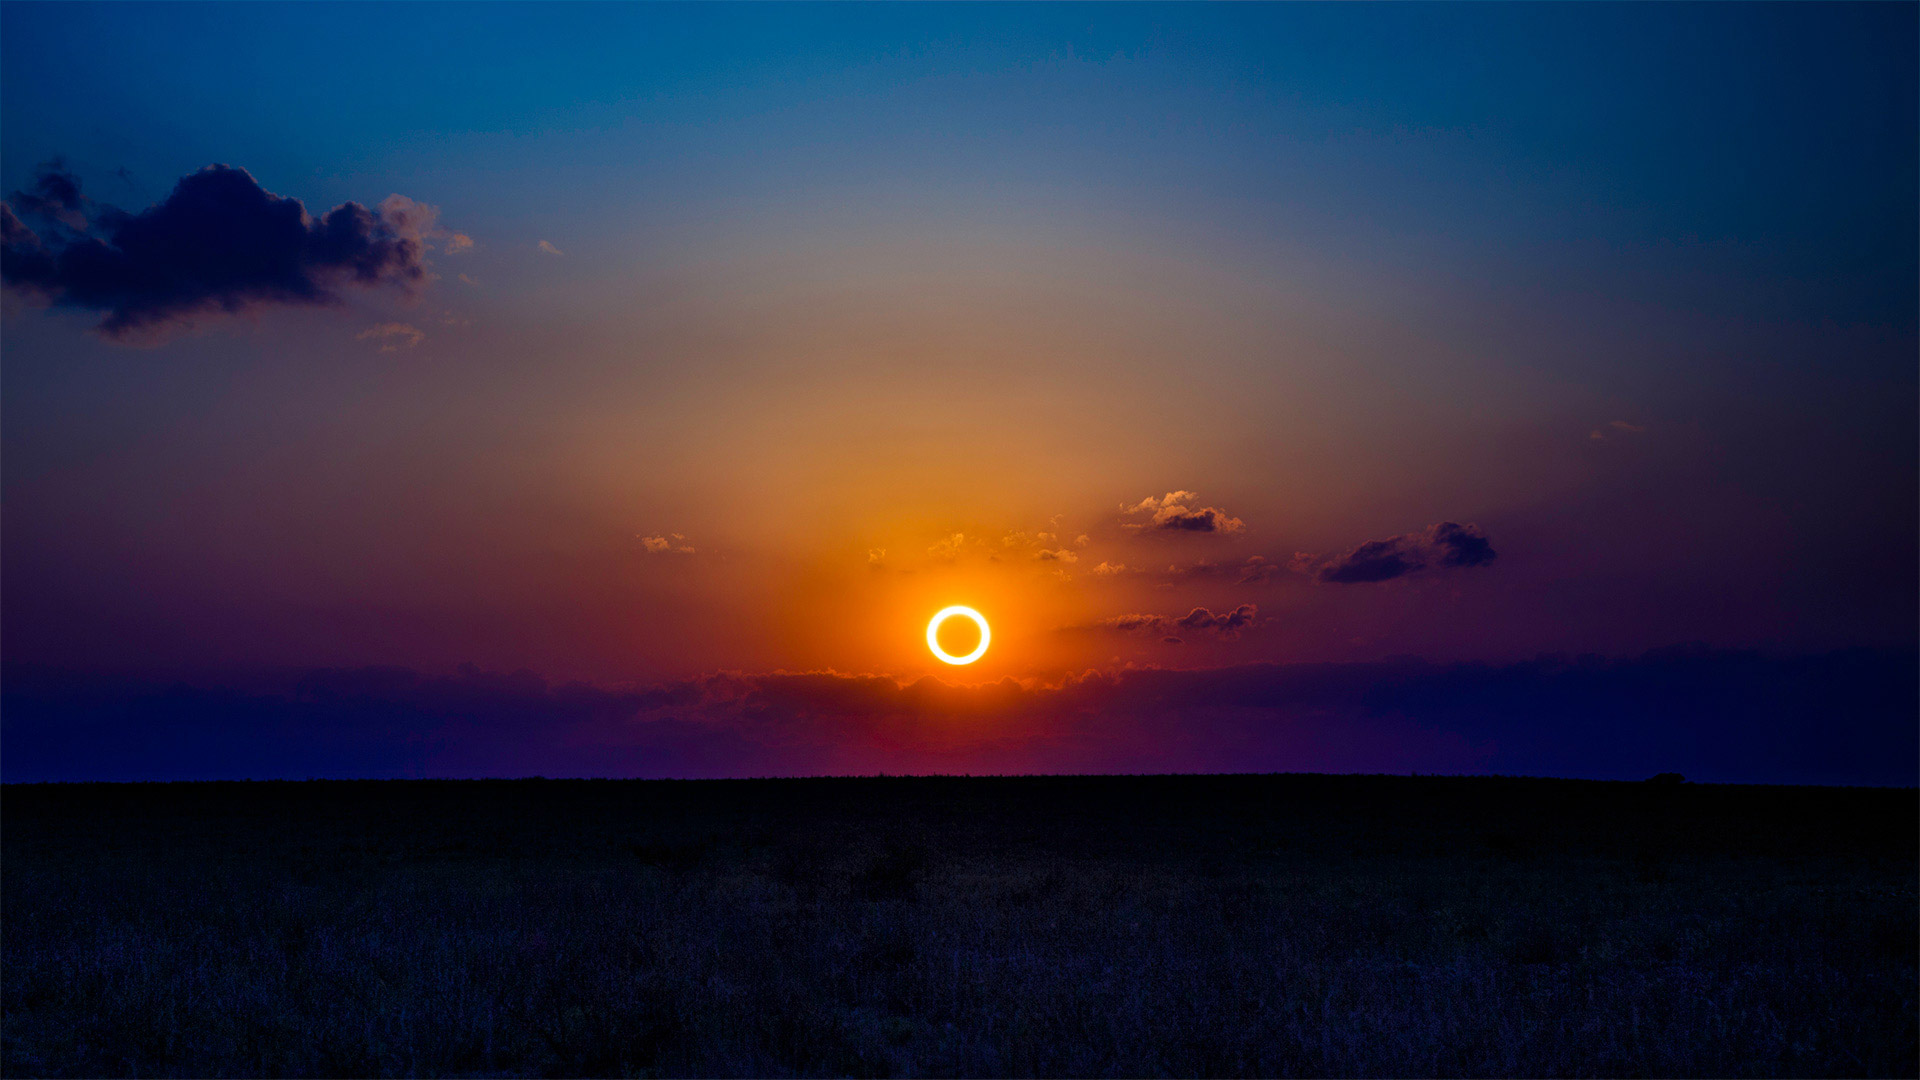 Annular eclipse over New Mexico, May 20, 2012 - ssucsy/Getty Images)